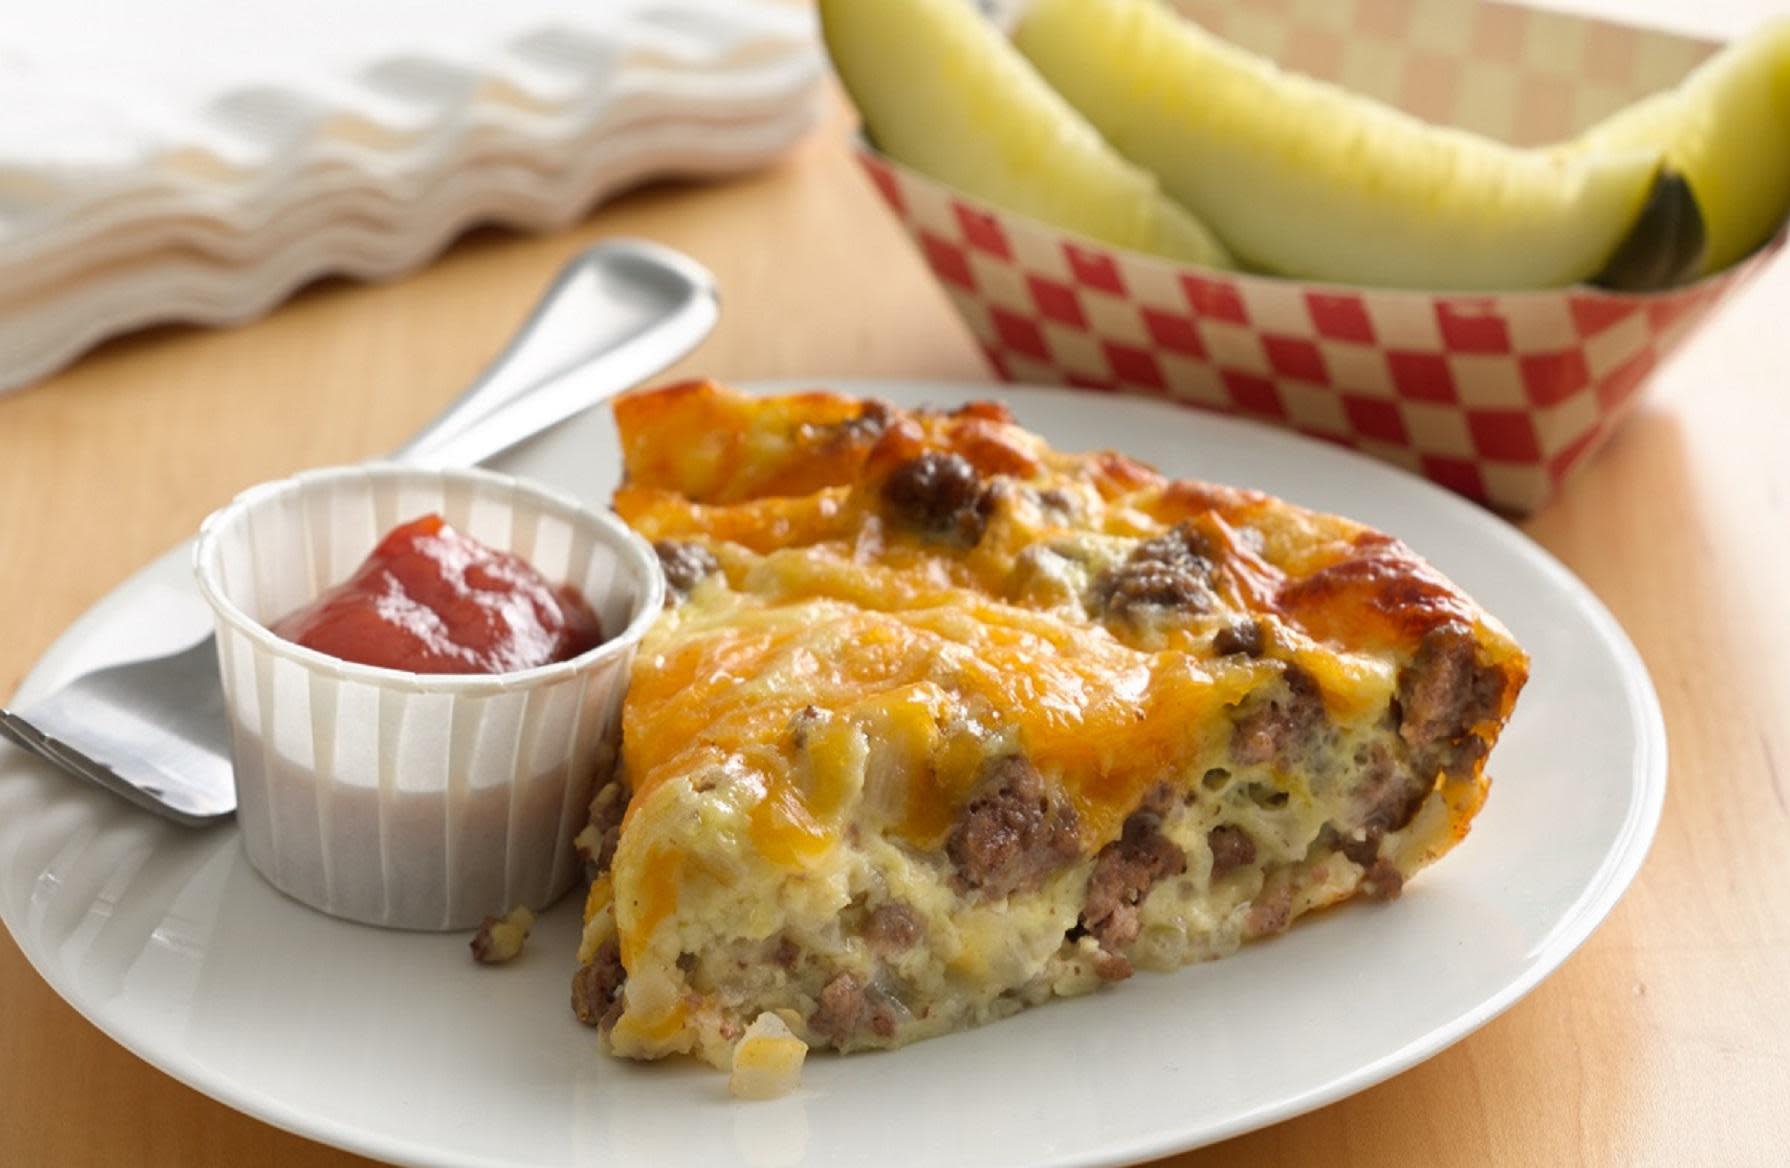 This easy cheeseburger pie recipe reinvents a classic